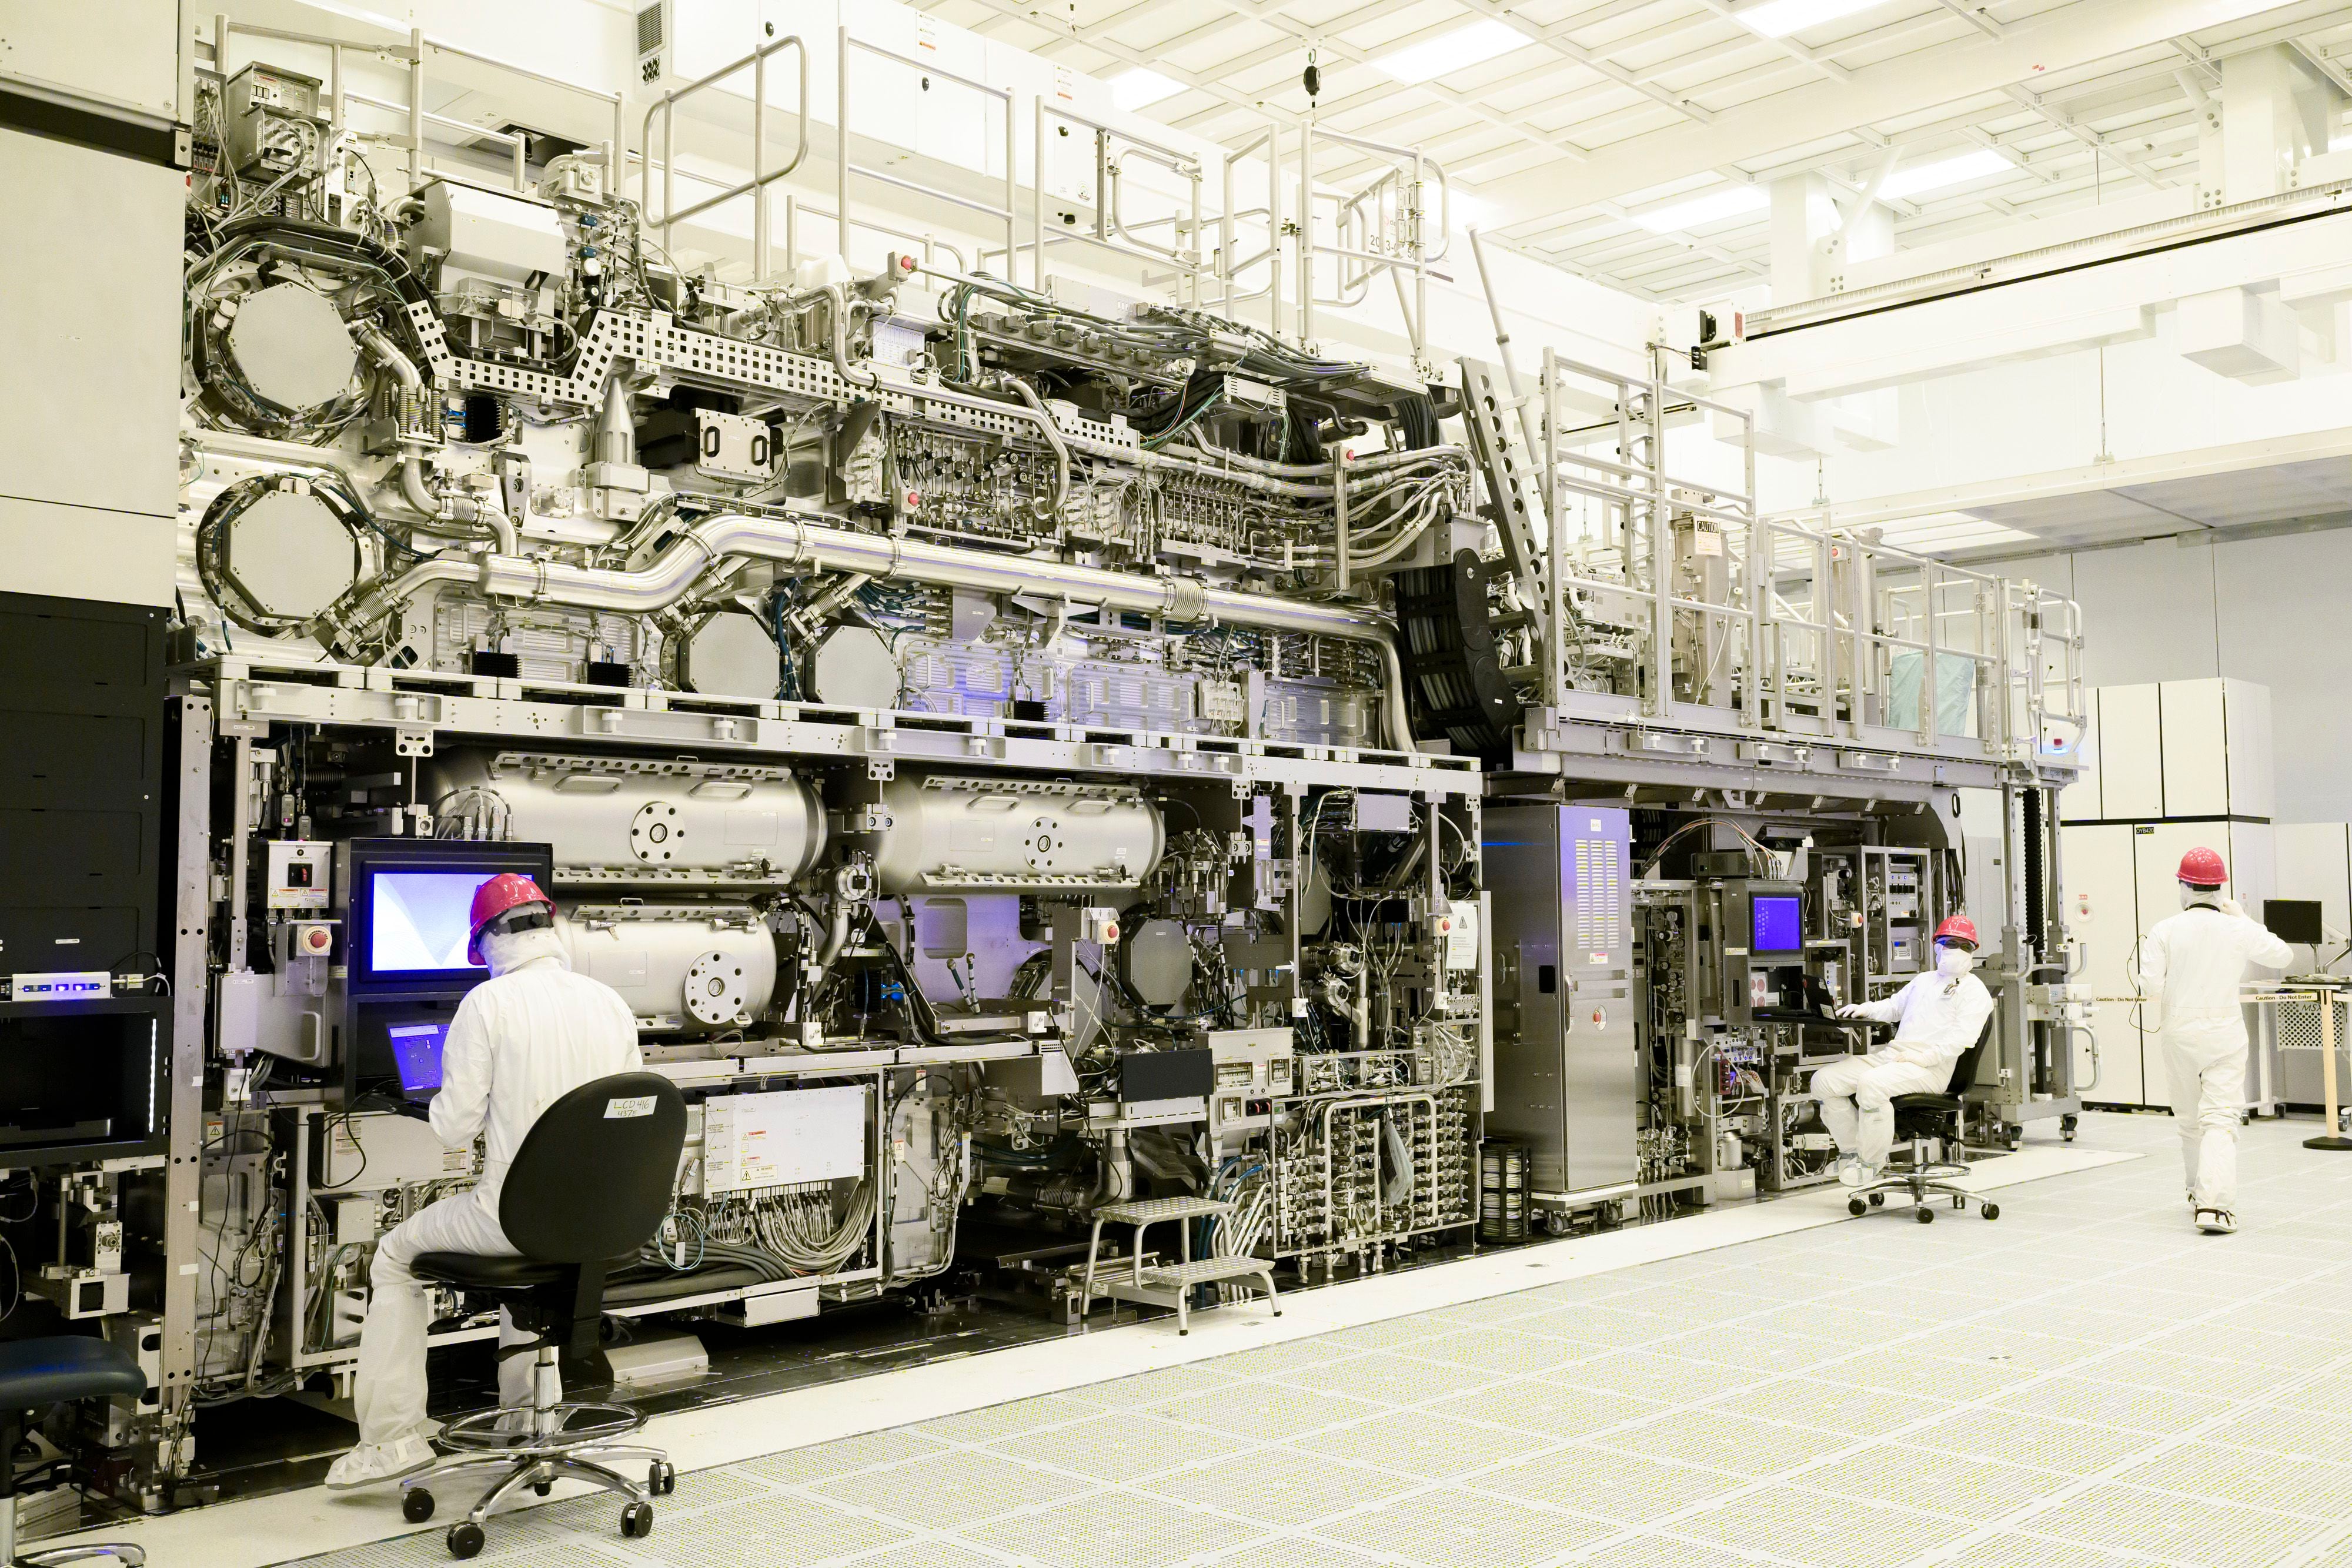 In this provided photo, Intel's High Numerical Aperture Extreme Ultraviolet lithography tool sits in a clean room at Intel Corporation's Fab D1X in Hillsboro, Ore., in April 2024. The 165-ton High NA EUV tool was built by ASML and is the first commercial lithography system of its kind in the world. The machine will allow Intel Foundry to continue its effort to create powerful chips with ever-smaller transistors.